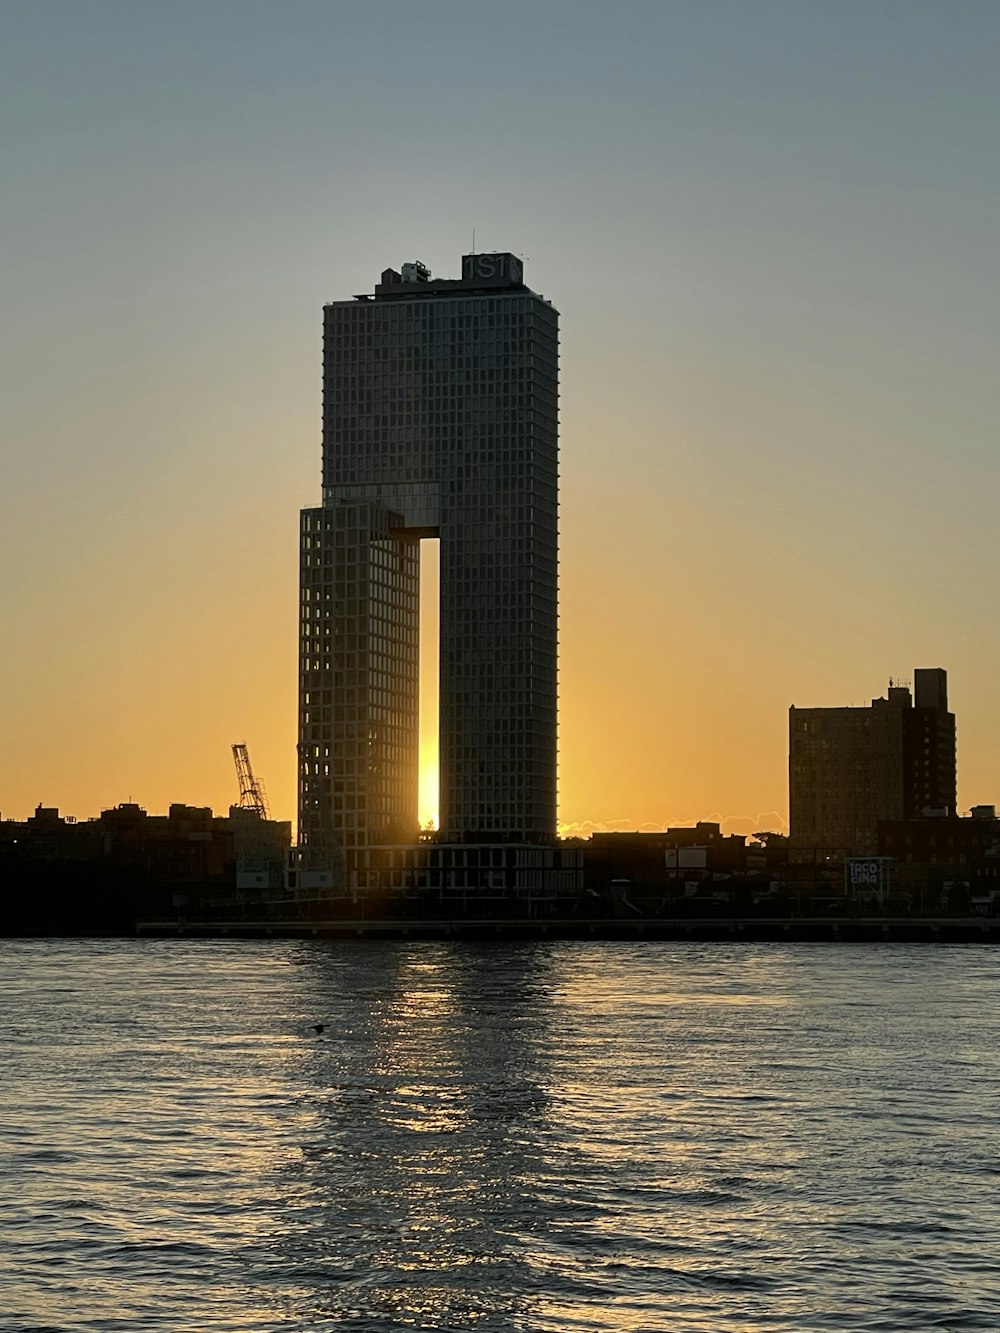 the sun is setting behind a tall building